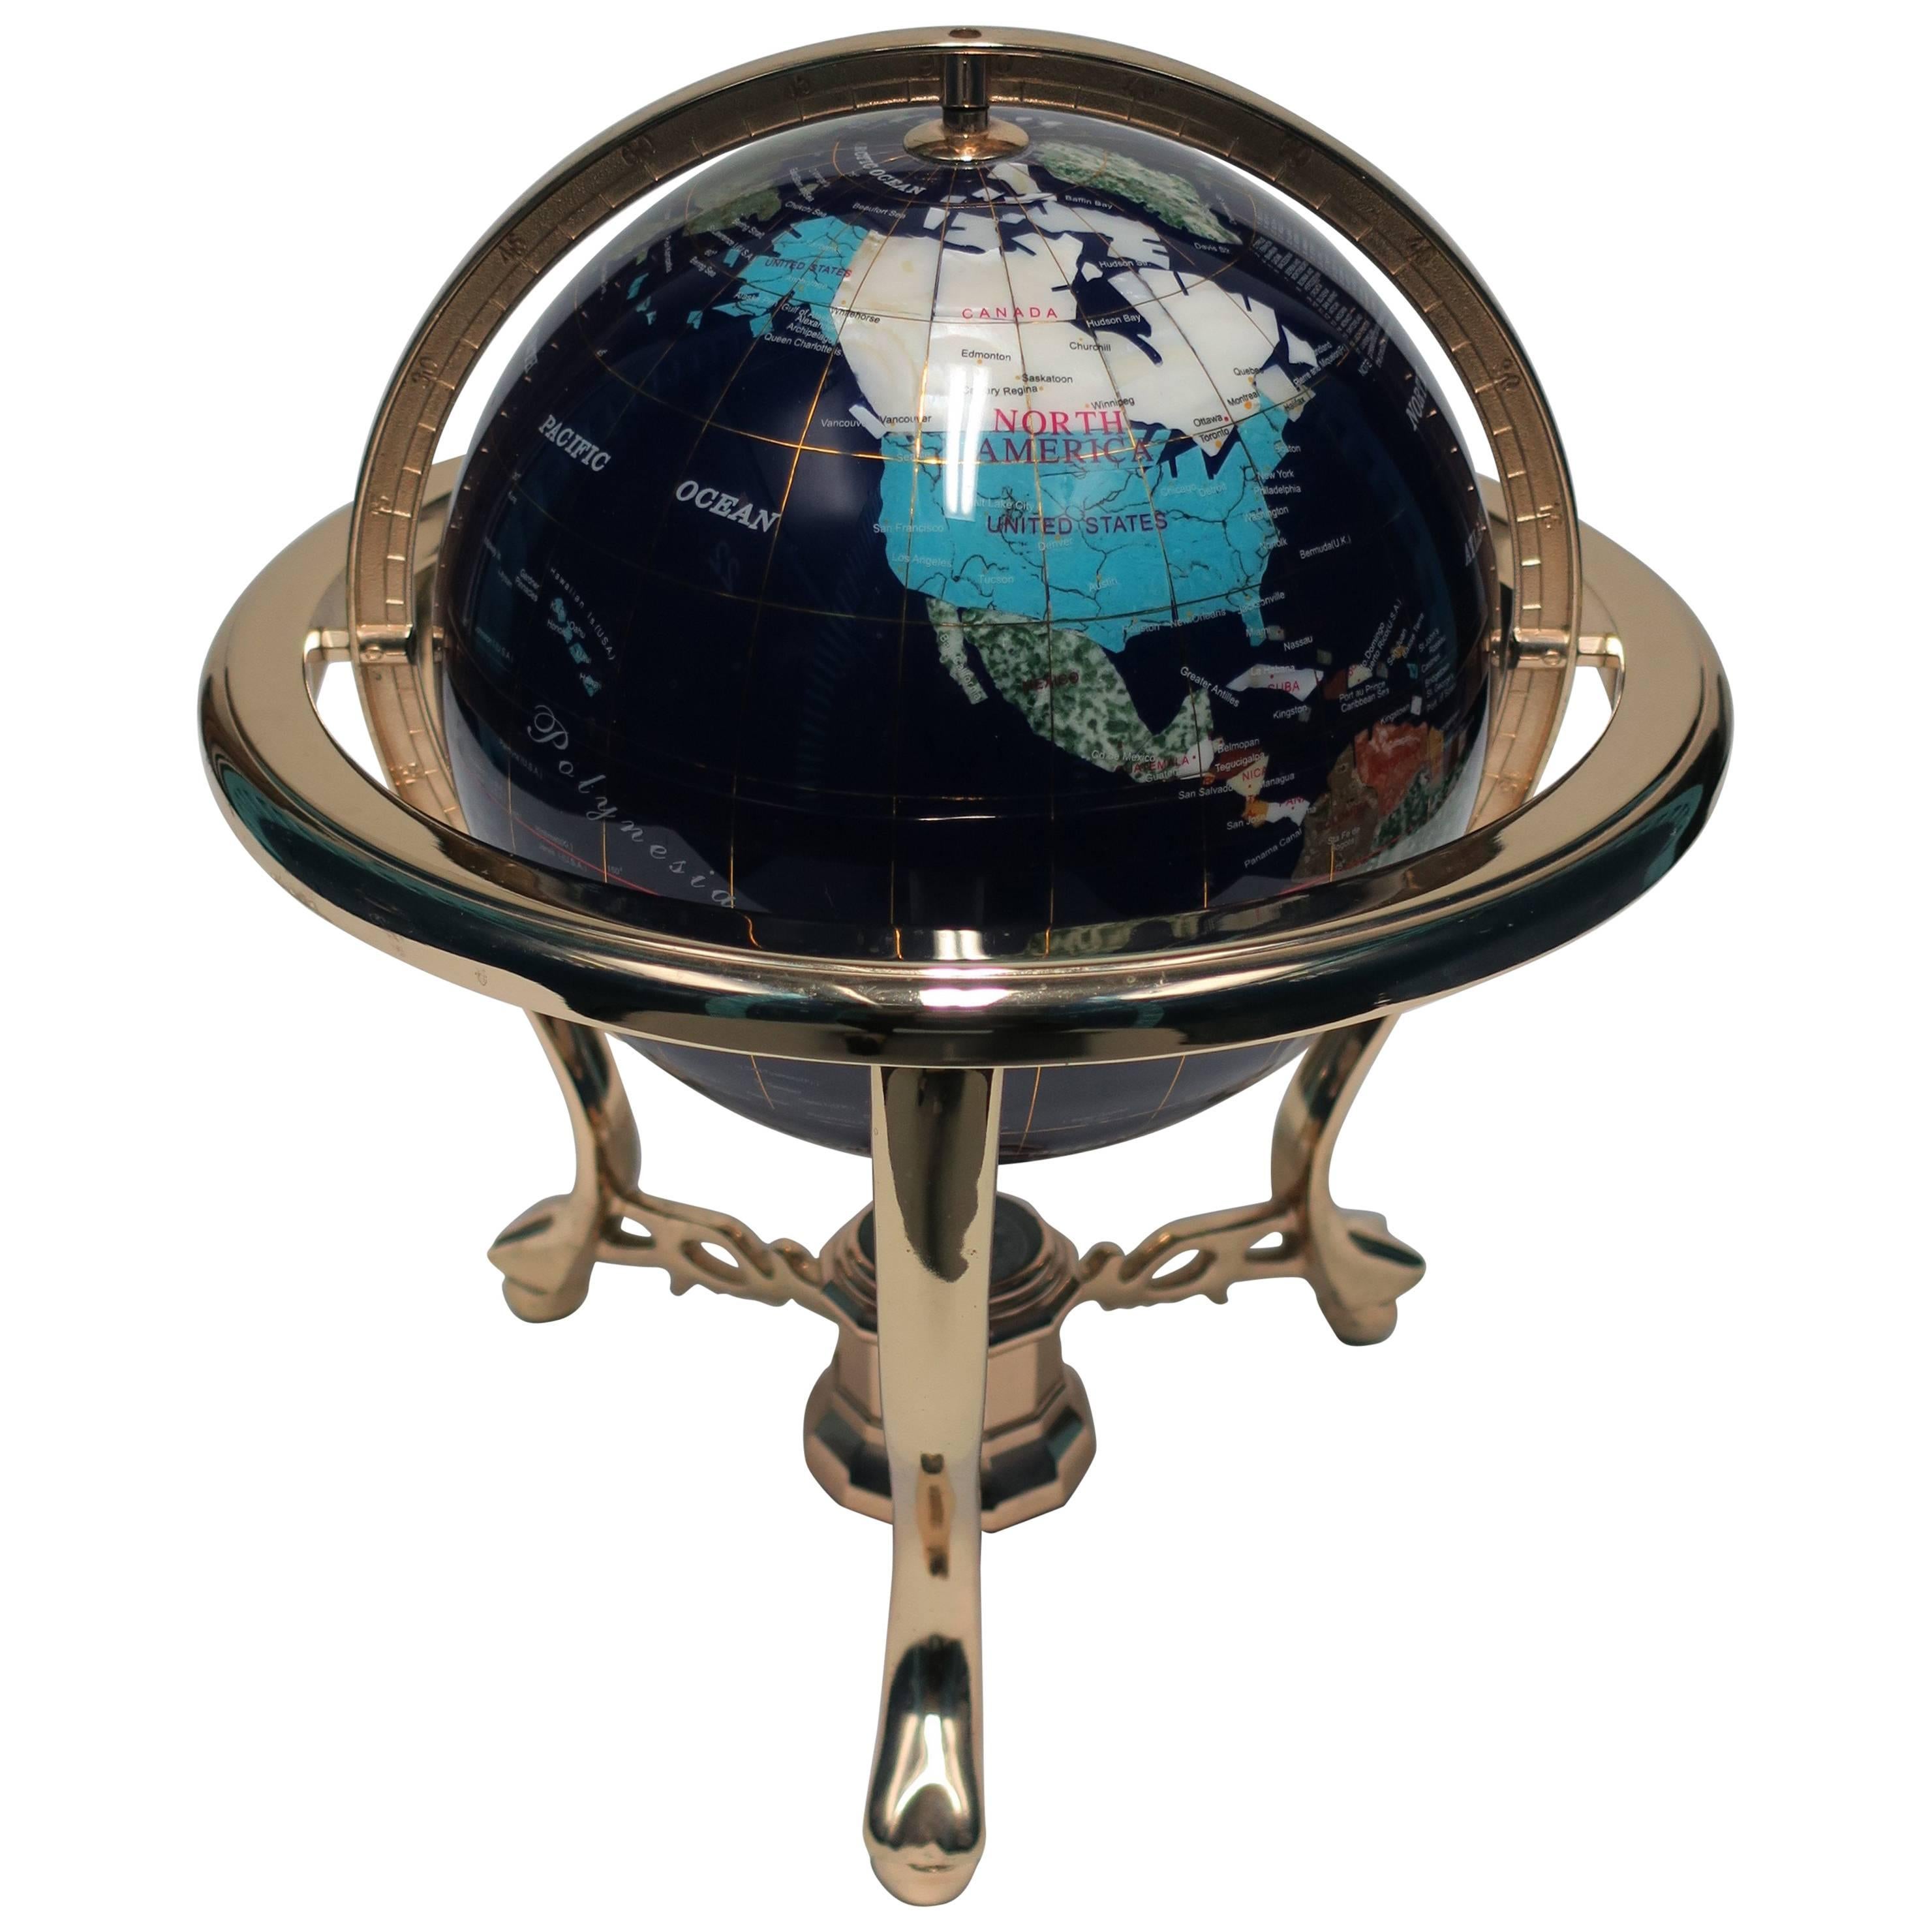 Vintage World Globe Of Marble and Onyx